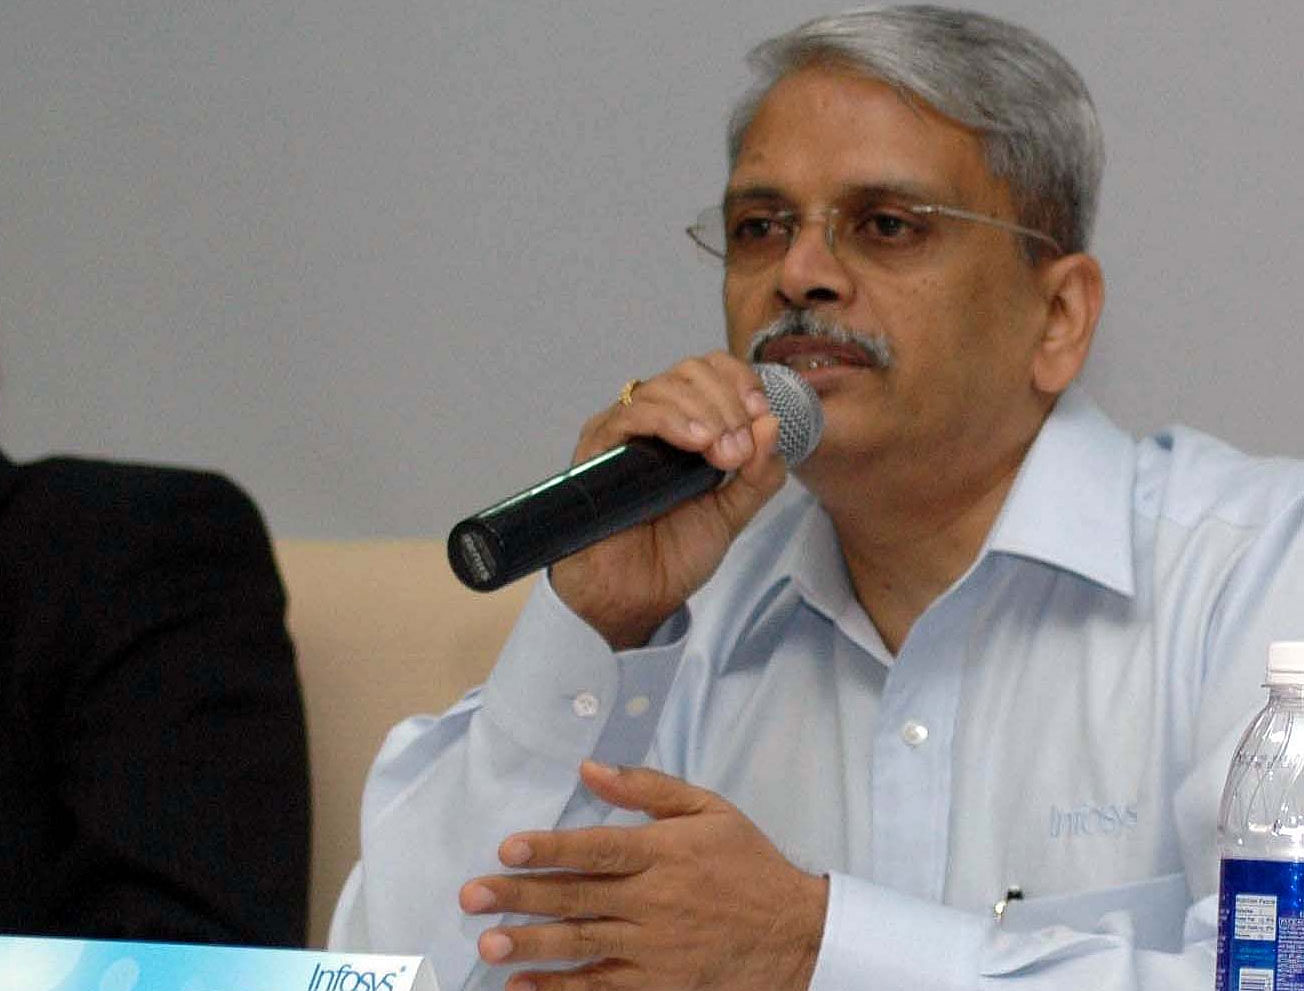 Reminiscing time spent at the firm he co-created with six other friends in 1981, Infosys non-executive chairman S Gopalakrishnan said many major events in his life are linked to major milestones of Infosys. DH file photo